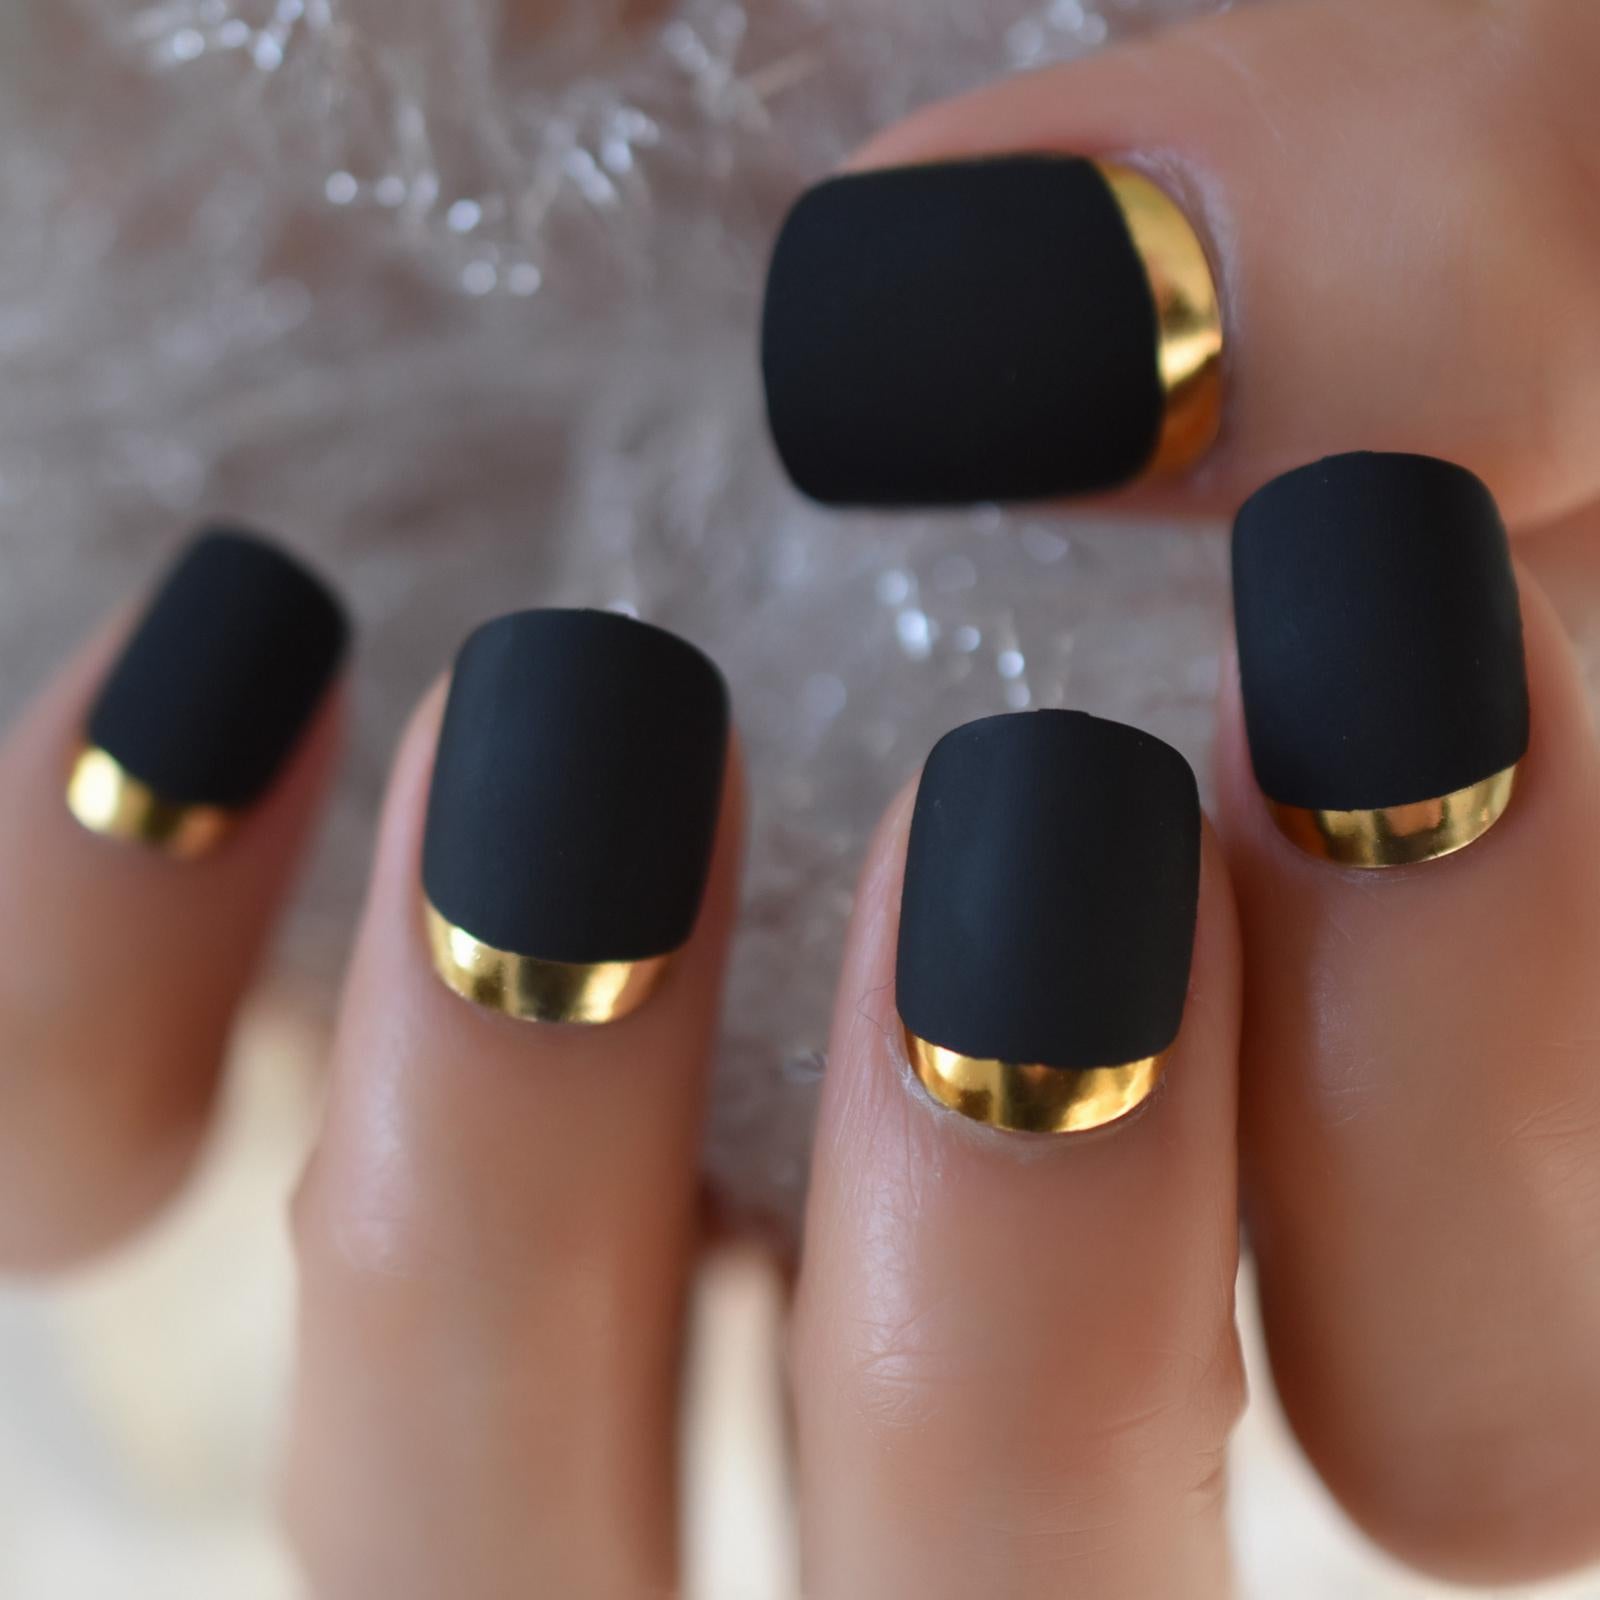 15 Professional Nail Ideas That Are Still Cute, According to Hiring Managers